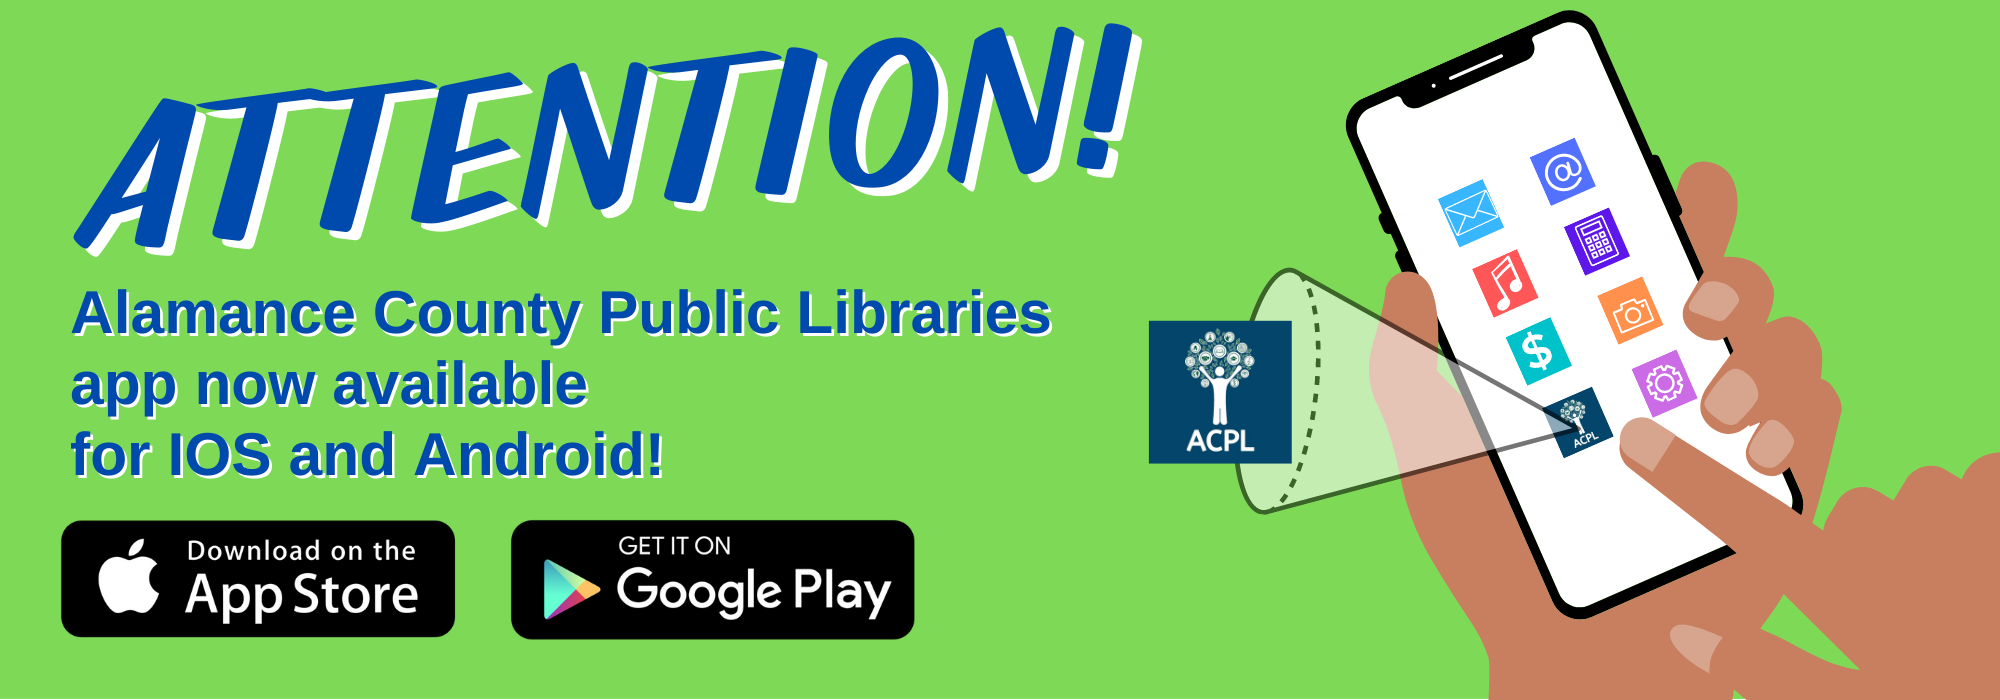 ATTENTION! – Library app